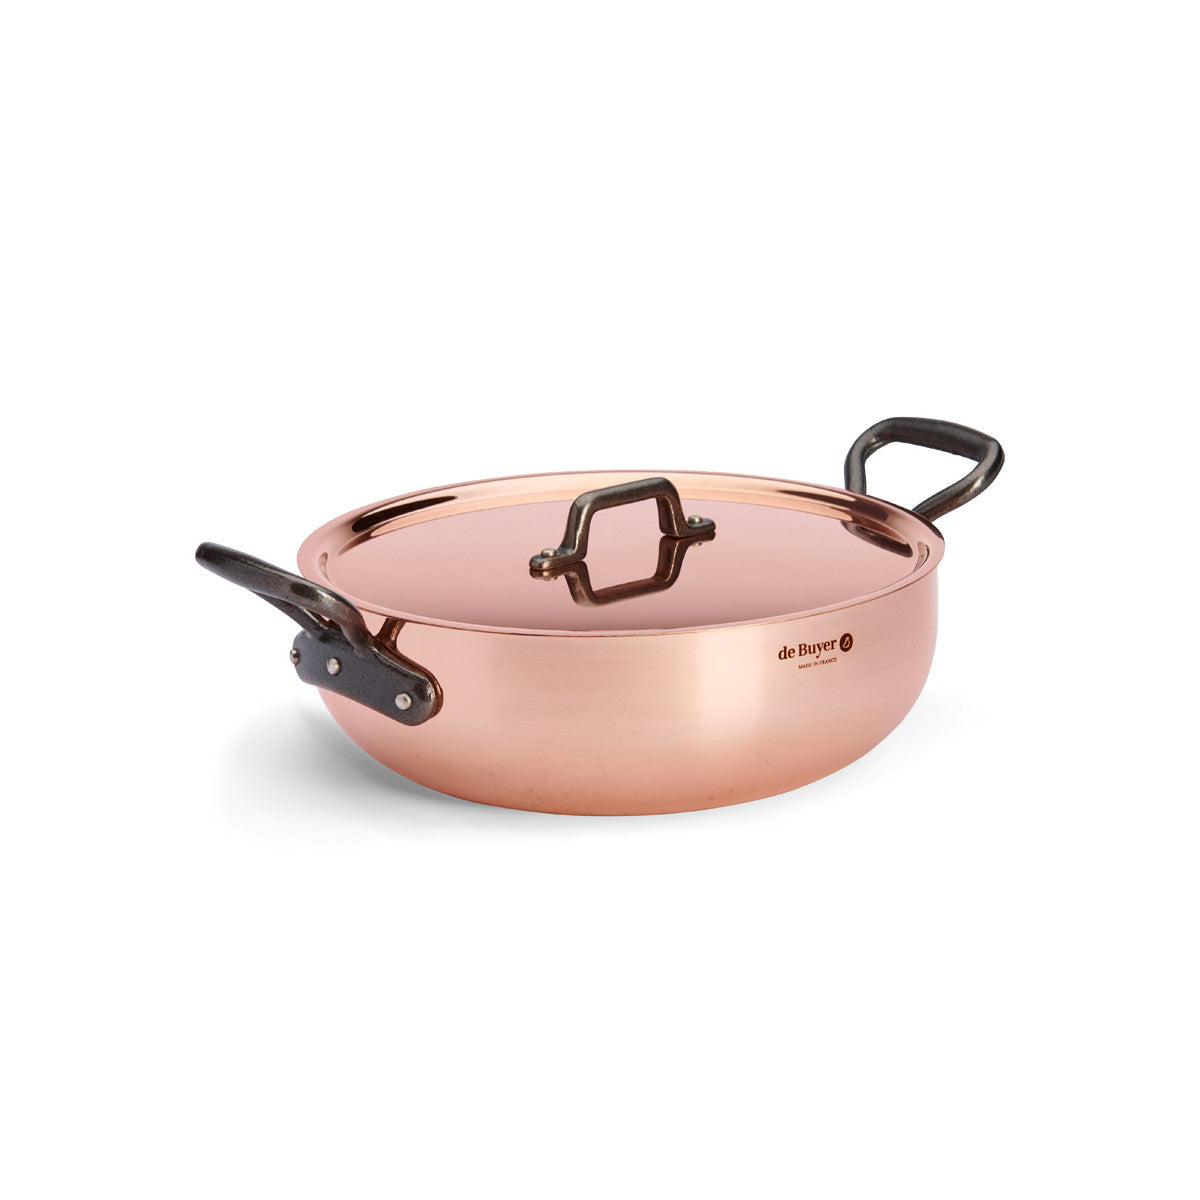 De Buyer Prima Matera rounded sauteuse with cast-iron handles, 28 cm